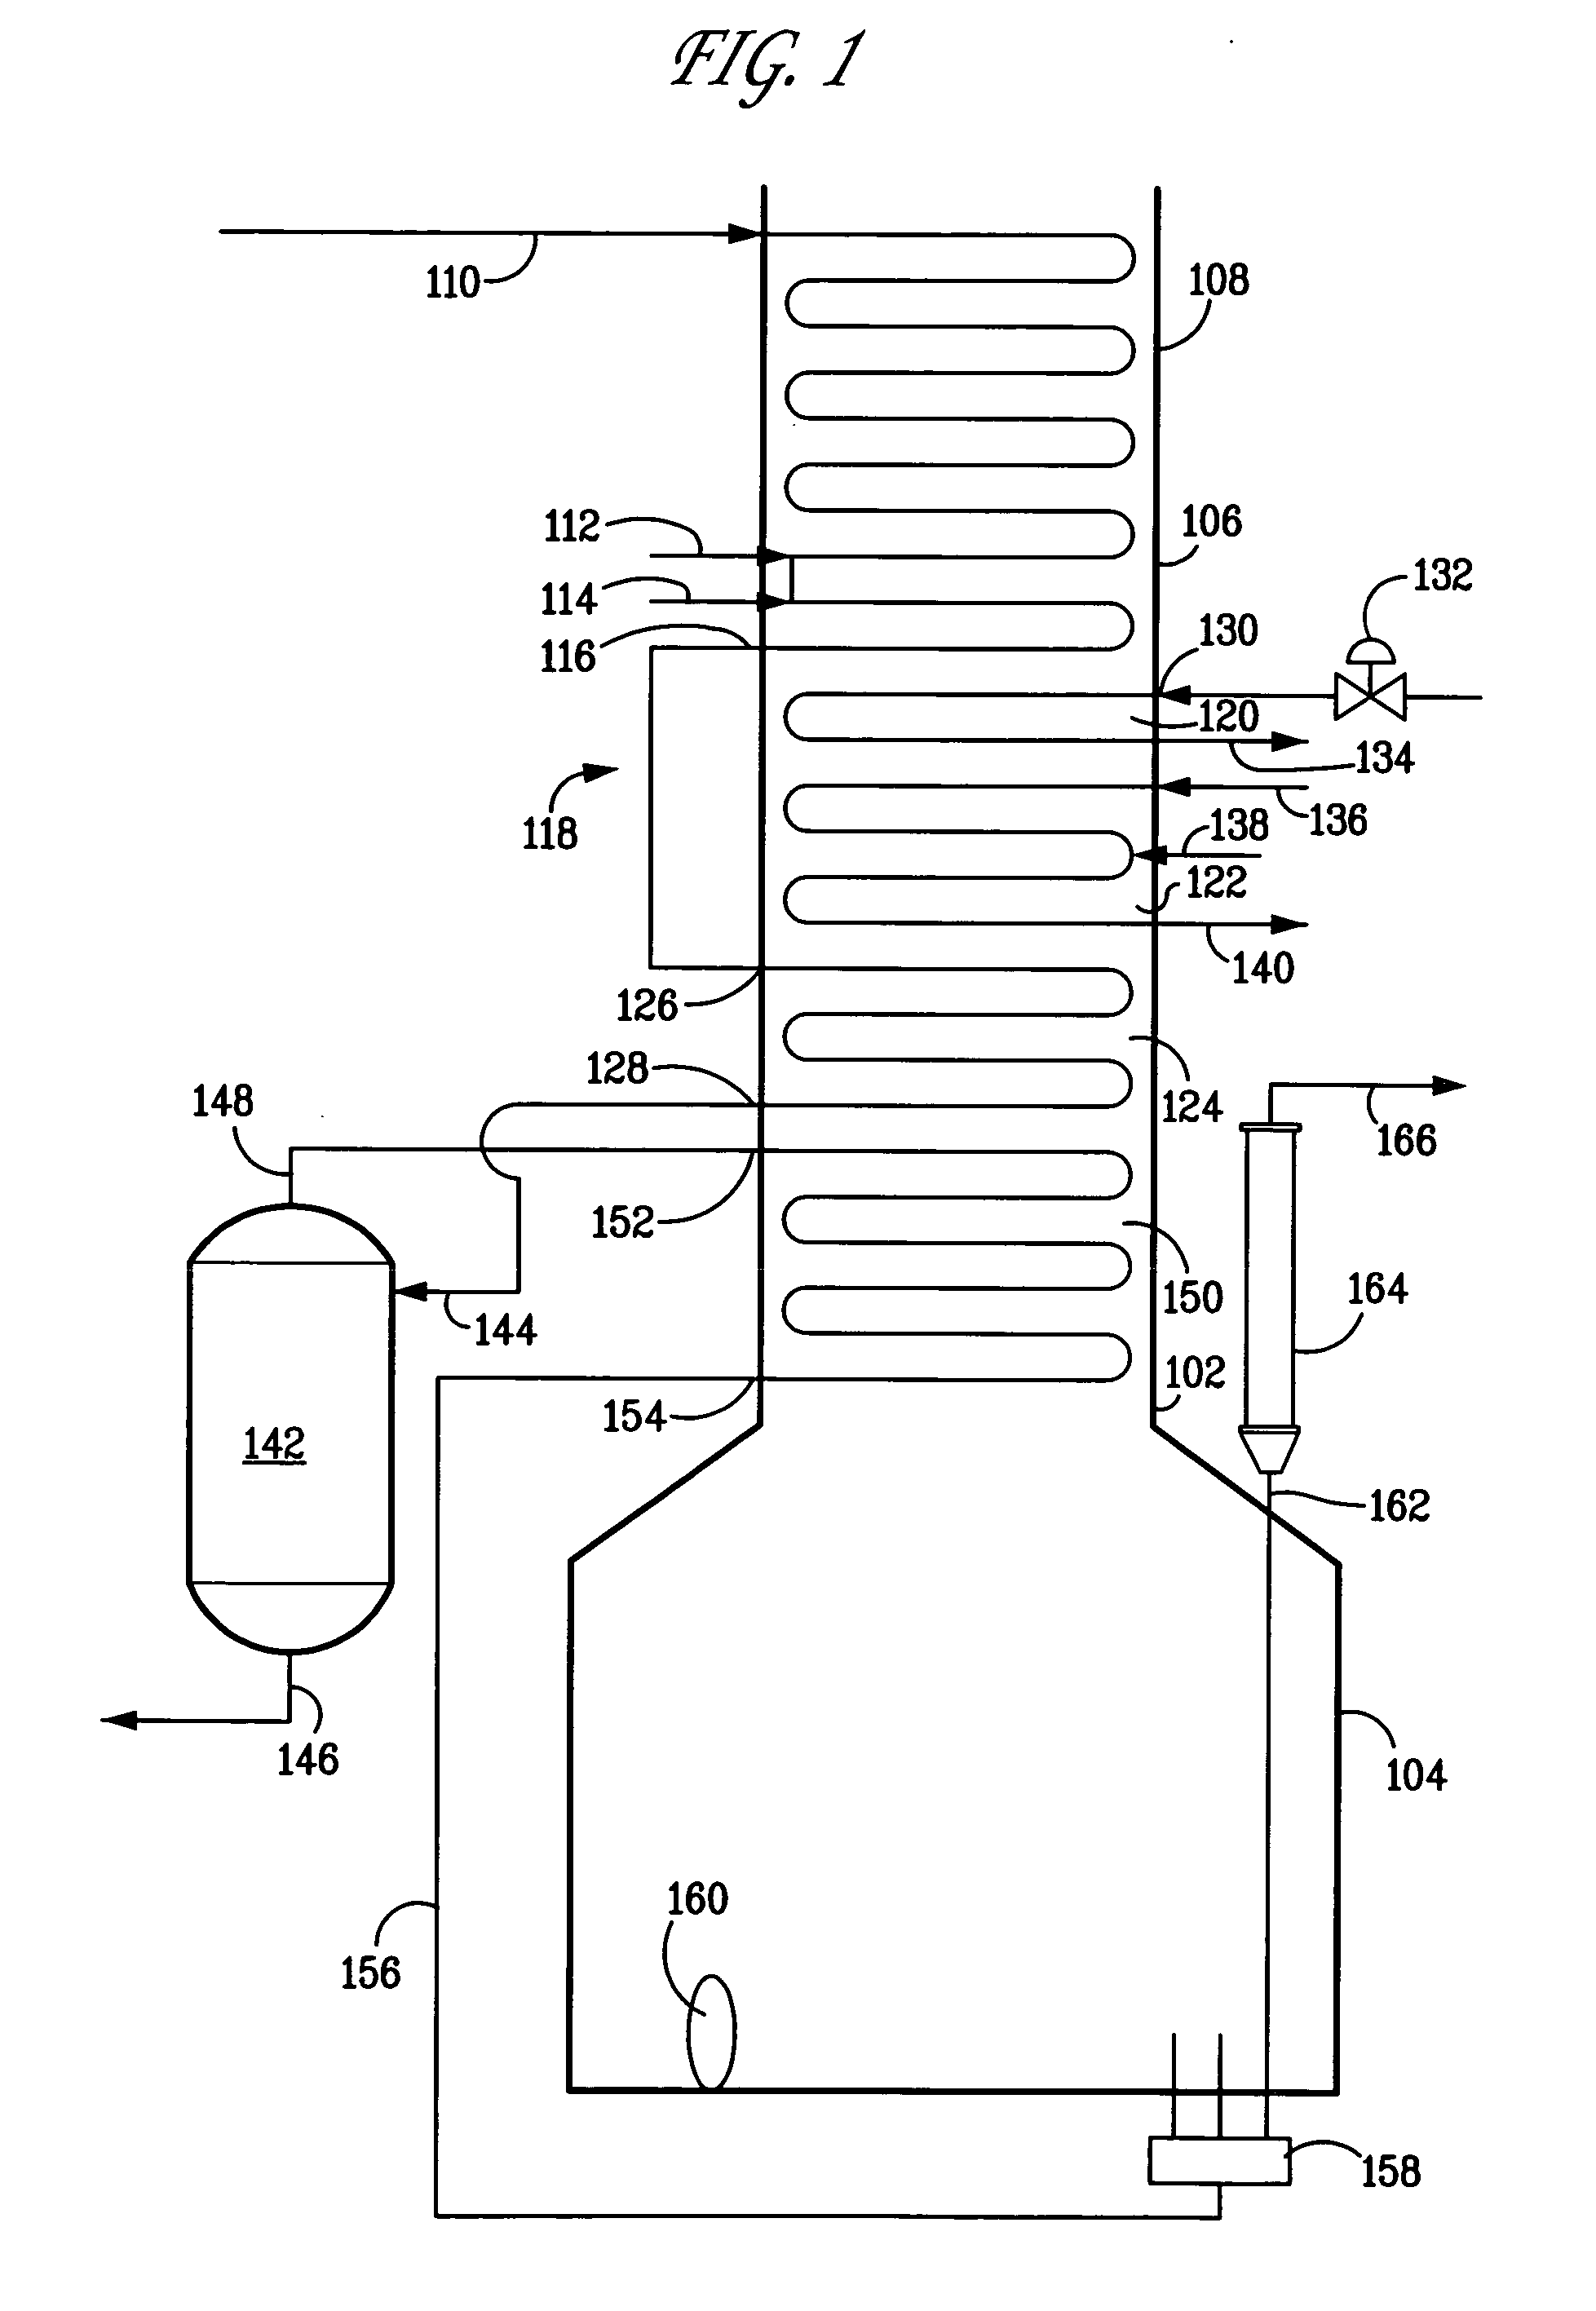 Apparatus and process for controlling temperature of heated feed directed to a flash drum whose overhead provides feed for cracking